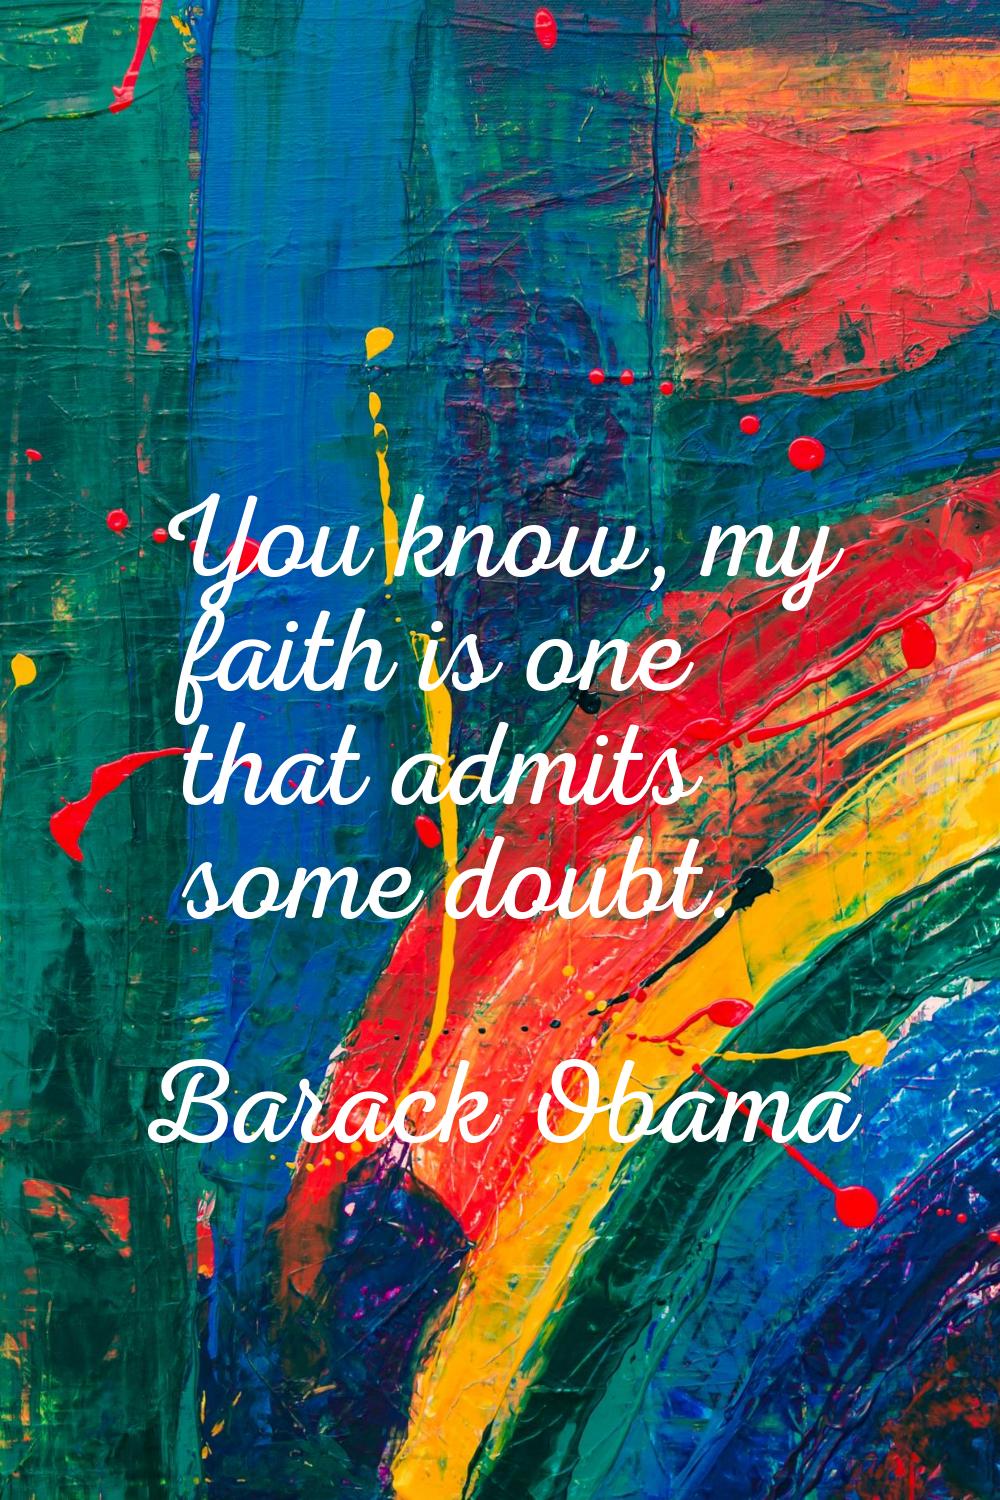 You know, my faith is one that admits some doubt.